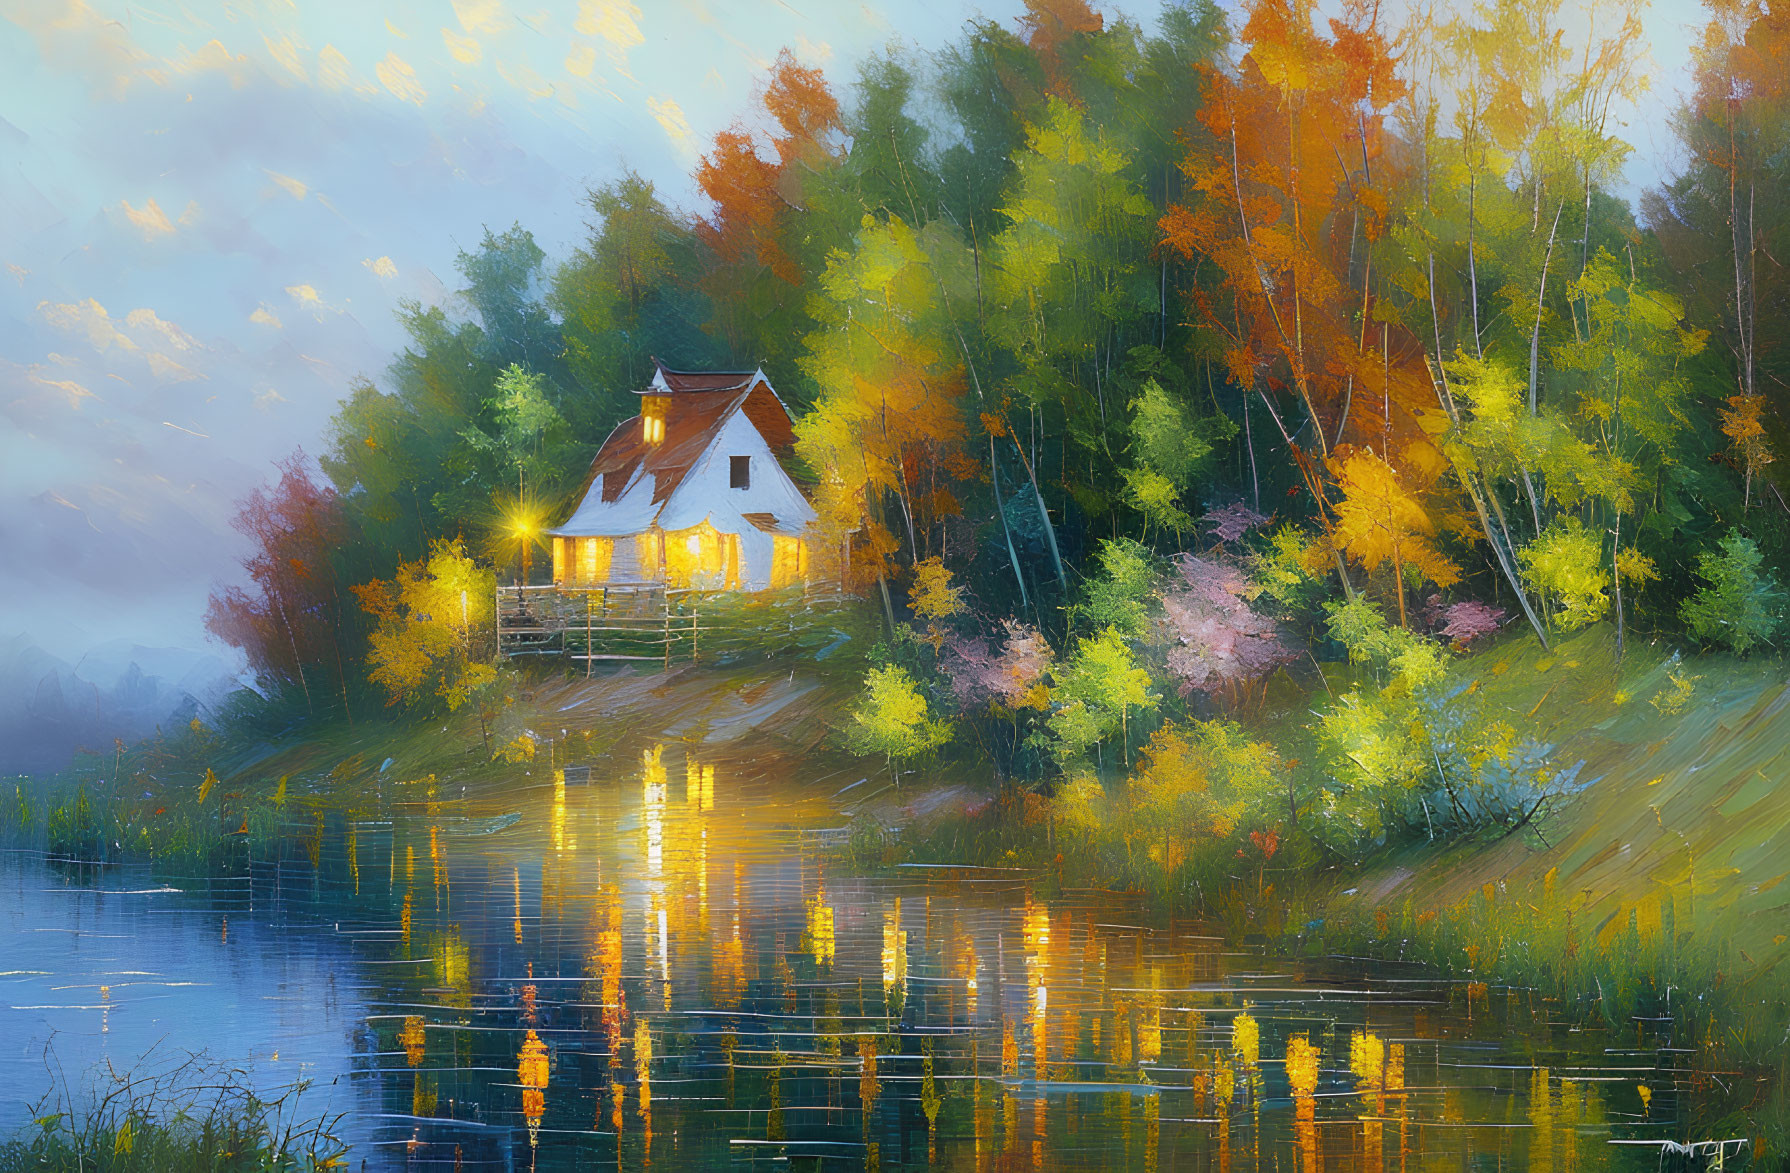 Tranquil autumn scene: cozy house by lake with colorful trees & warm lights.